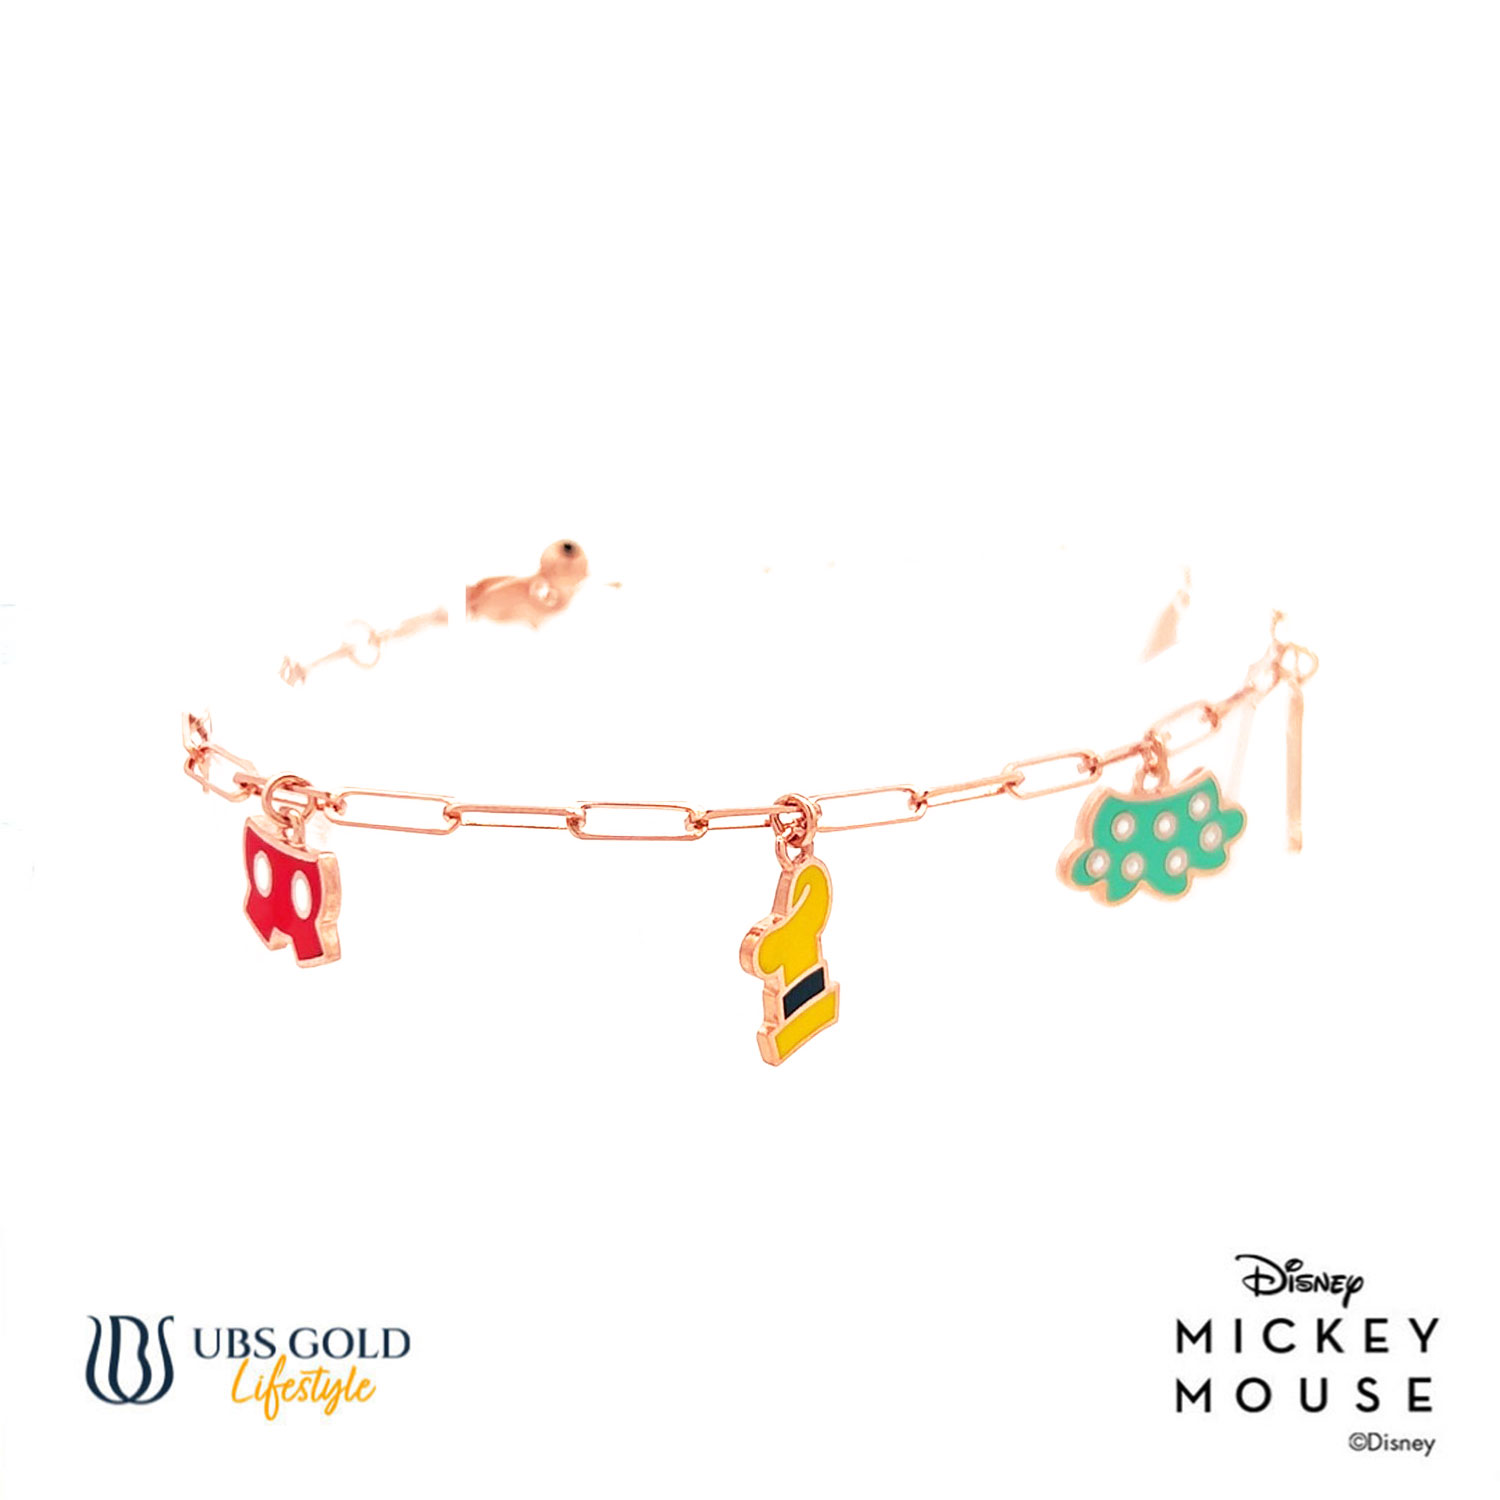 UBS Gold Gelang Emas Disney Mickey & Minnie Mouse - Kgy0051 - 17K